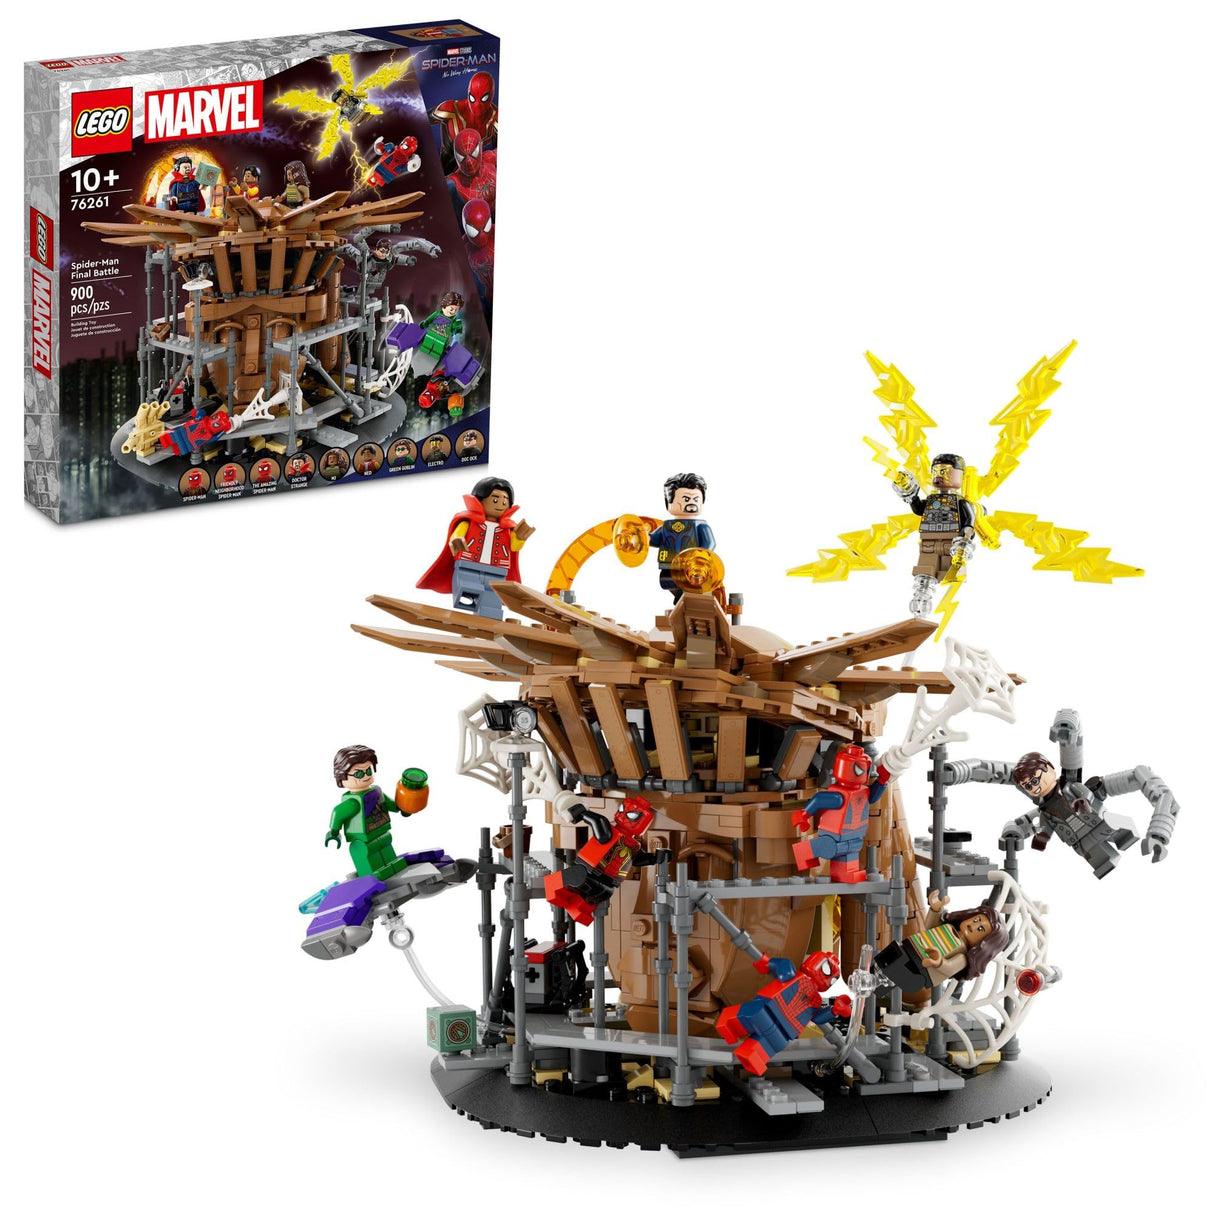 LEGO Marvel Spider-Man Final Battle 76261 Building Toy Set, Marvel Collectible Based on The Climax of The Spider-Man: No Way Home Movie, Multiverse Marvel Playset with 3 Versions of Spider-Man